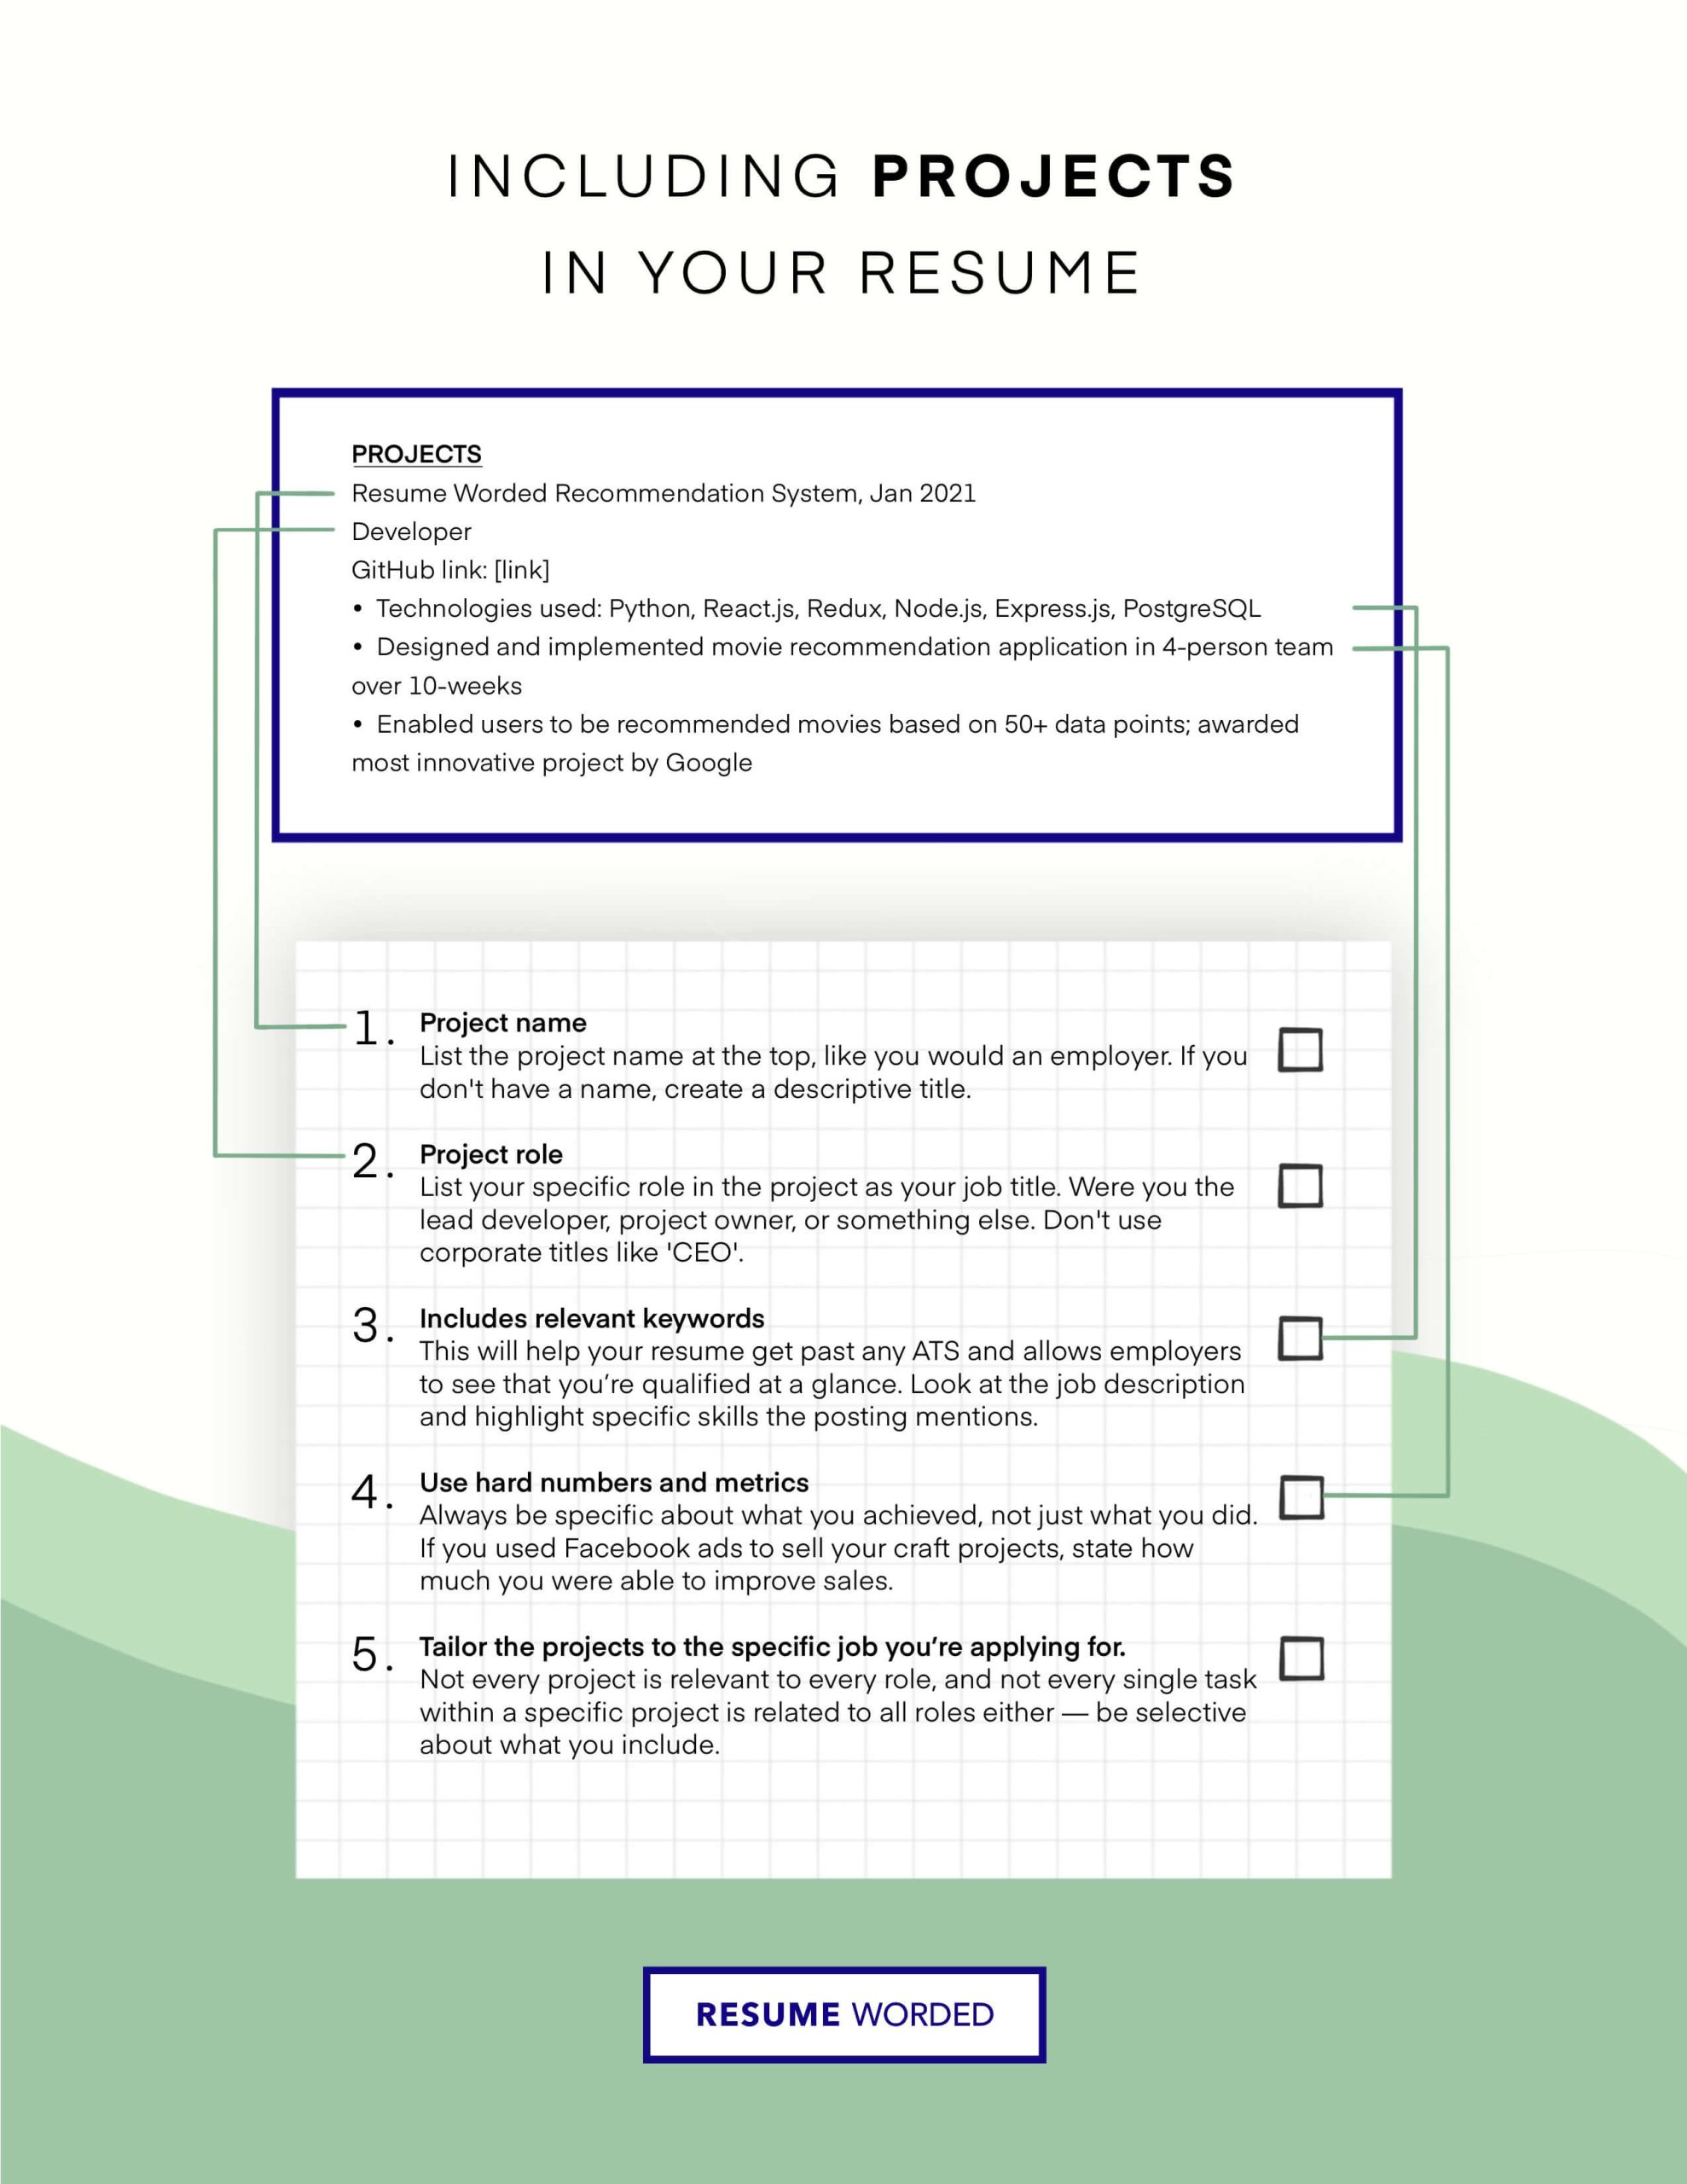 Sample Resume Describing What You are Doing now How to List Projects On A Resume